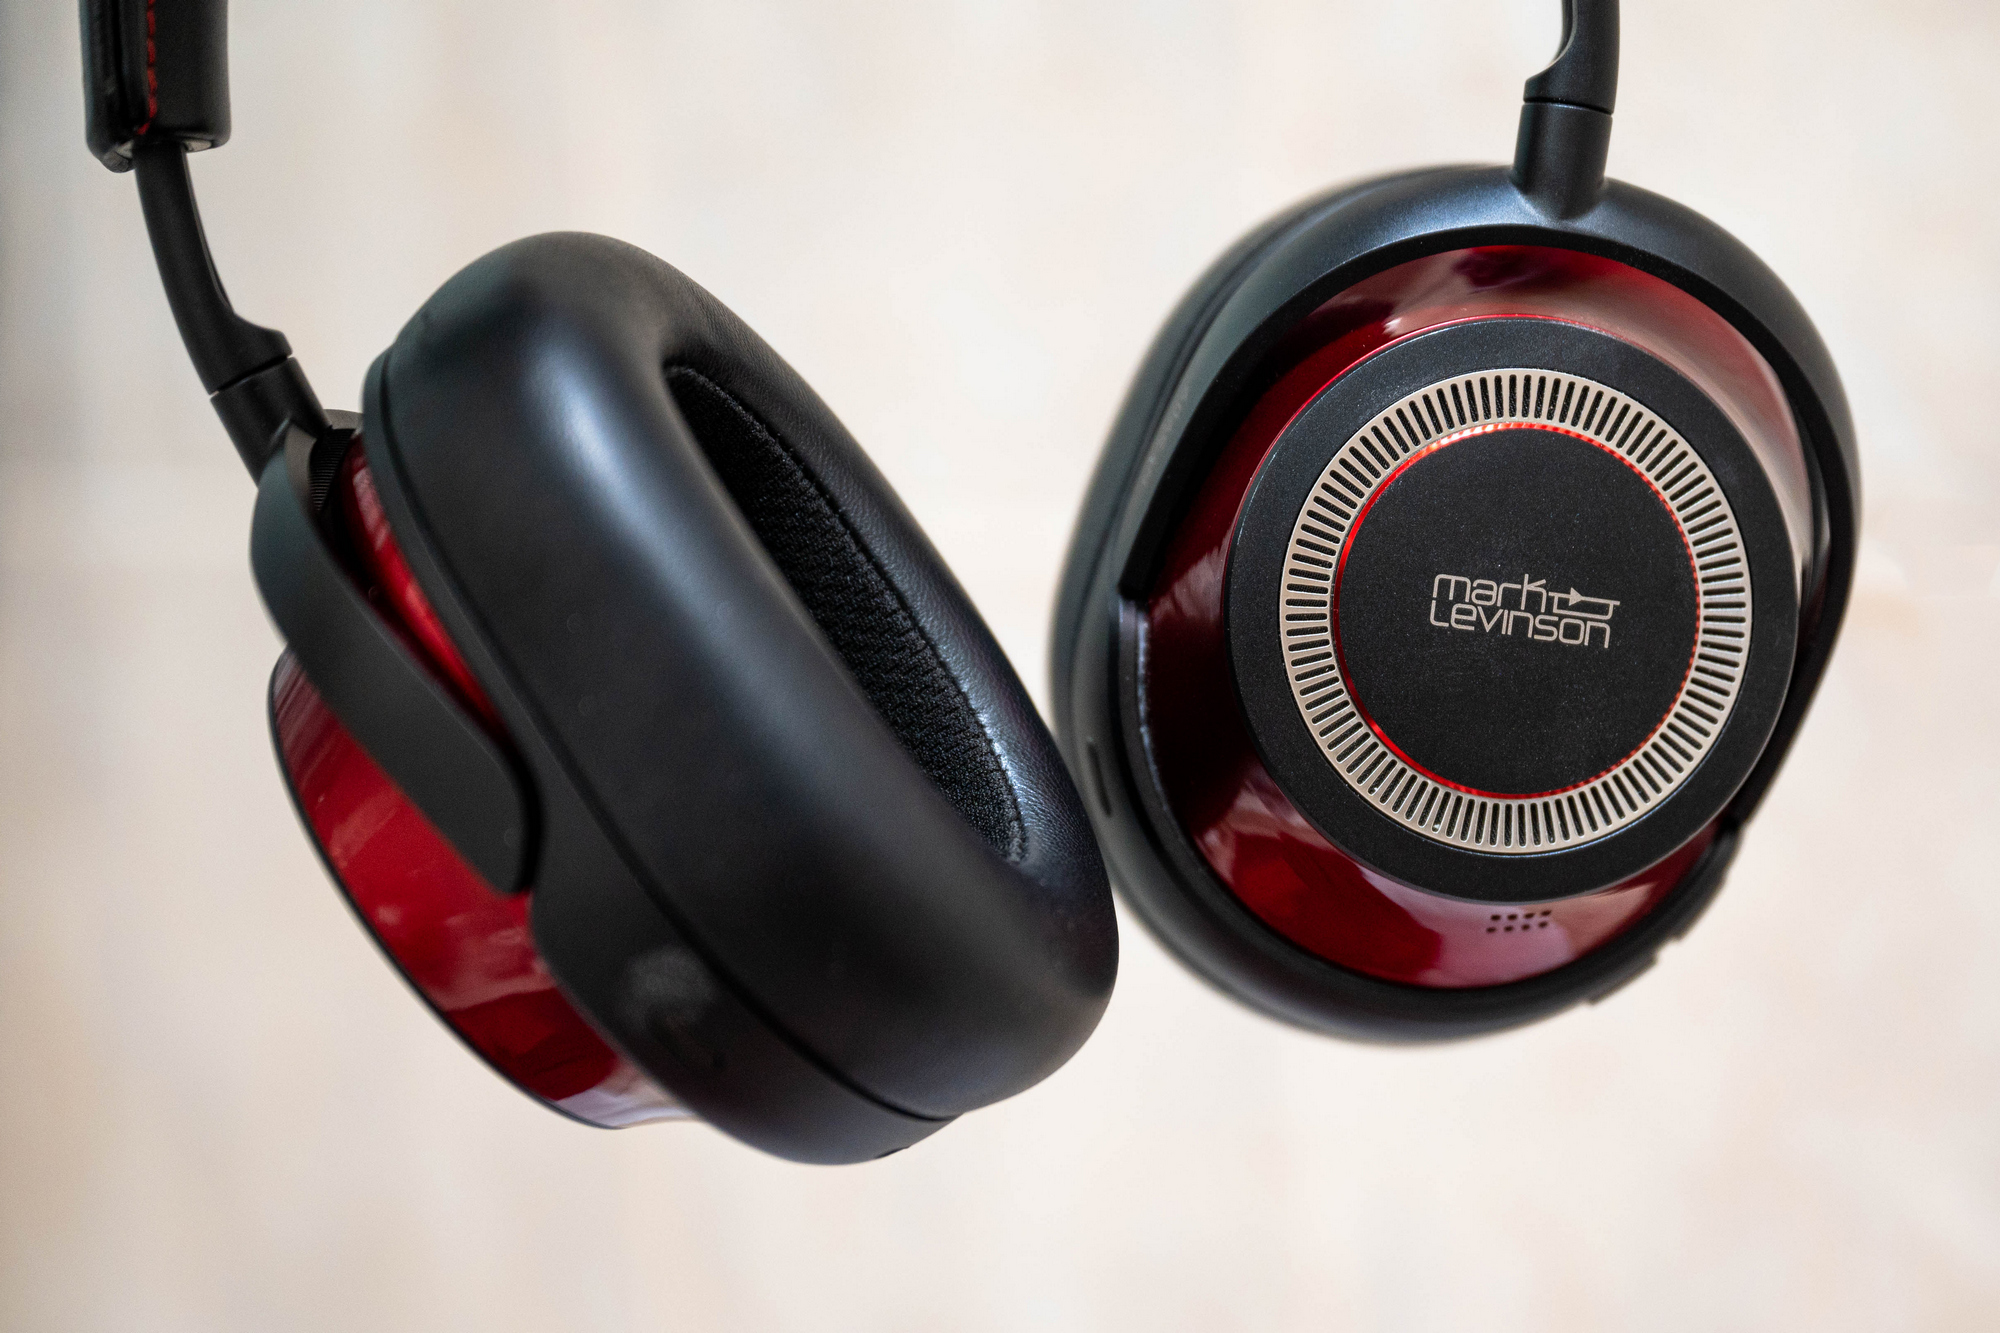 Mark Levinson No. 5909 -- Most luxurious over-ear noise-cancelling headphone